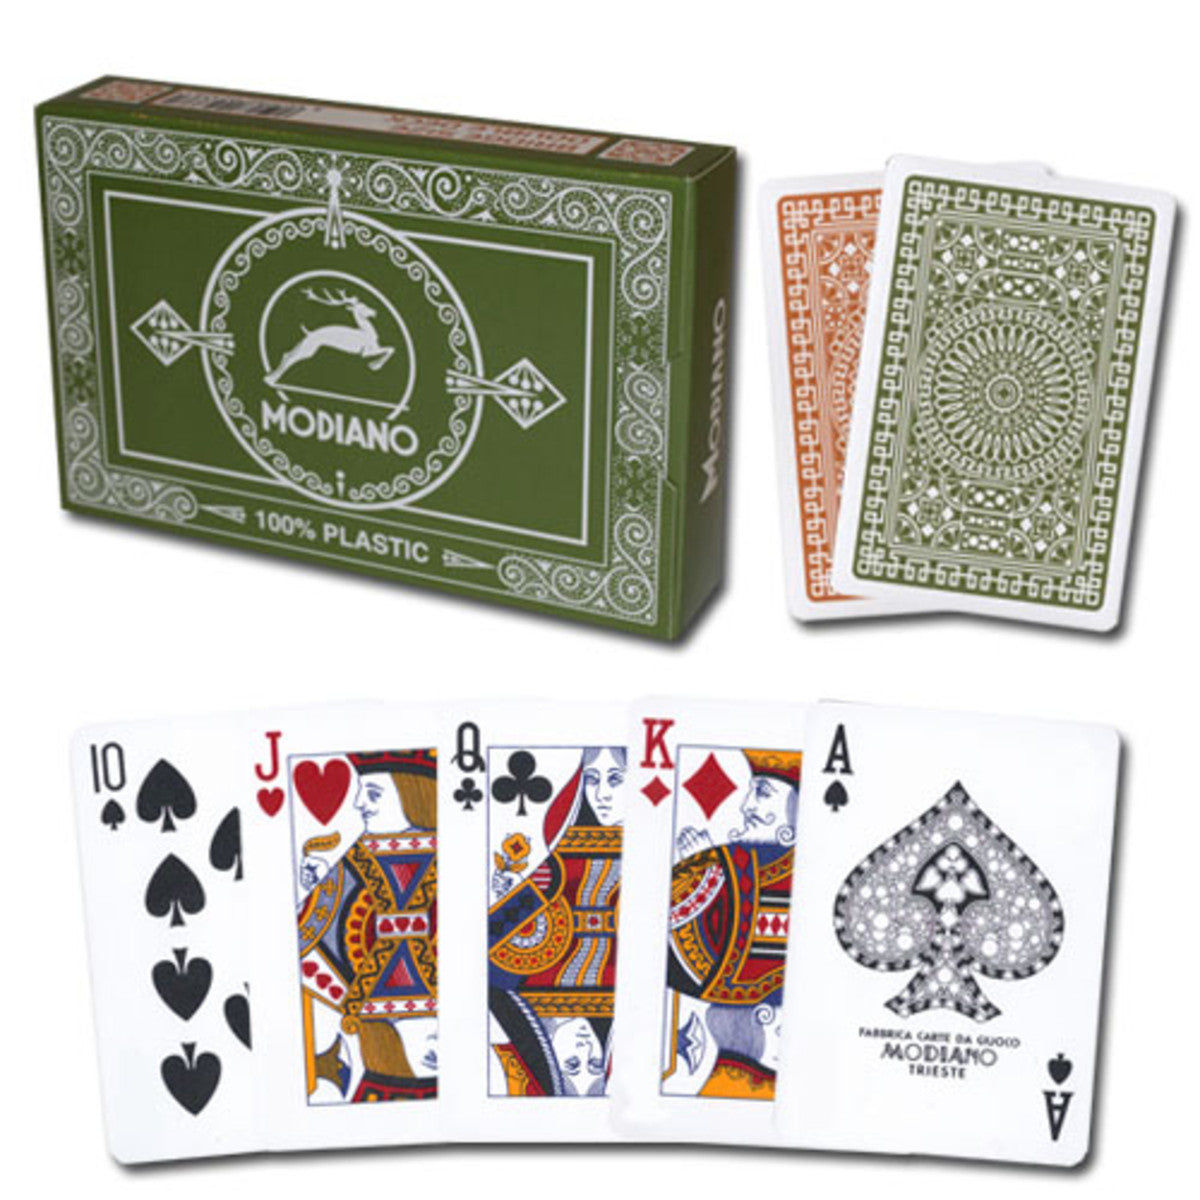 Modiano Brand 100% Plastic Playing Cards